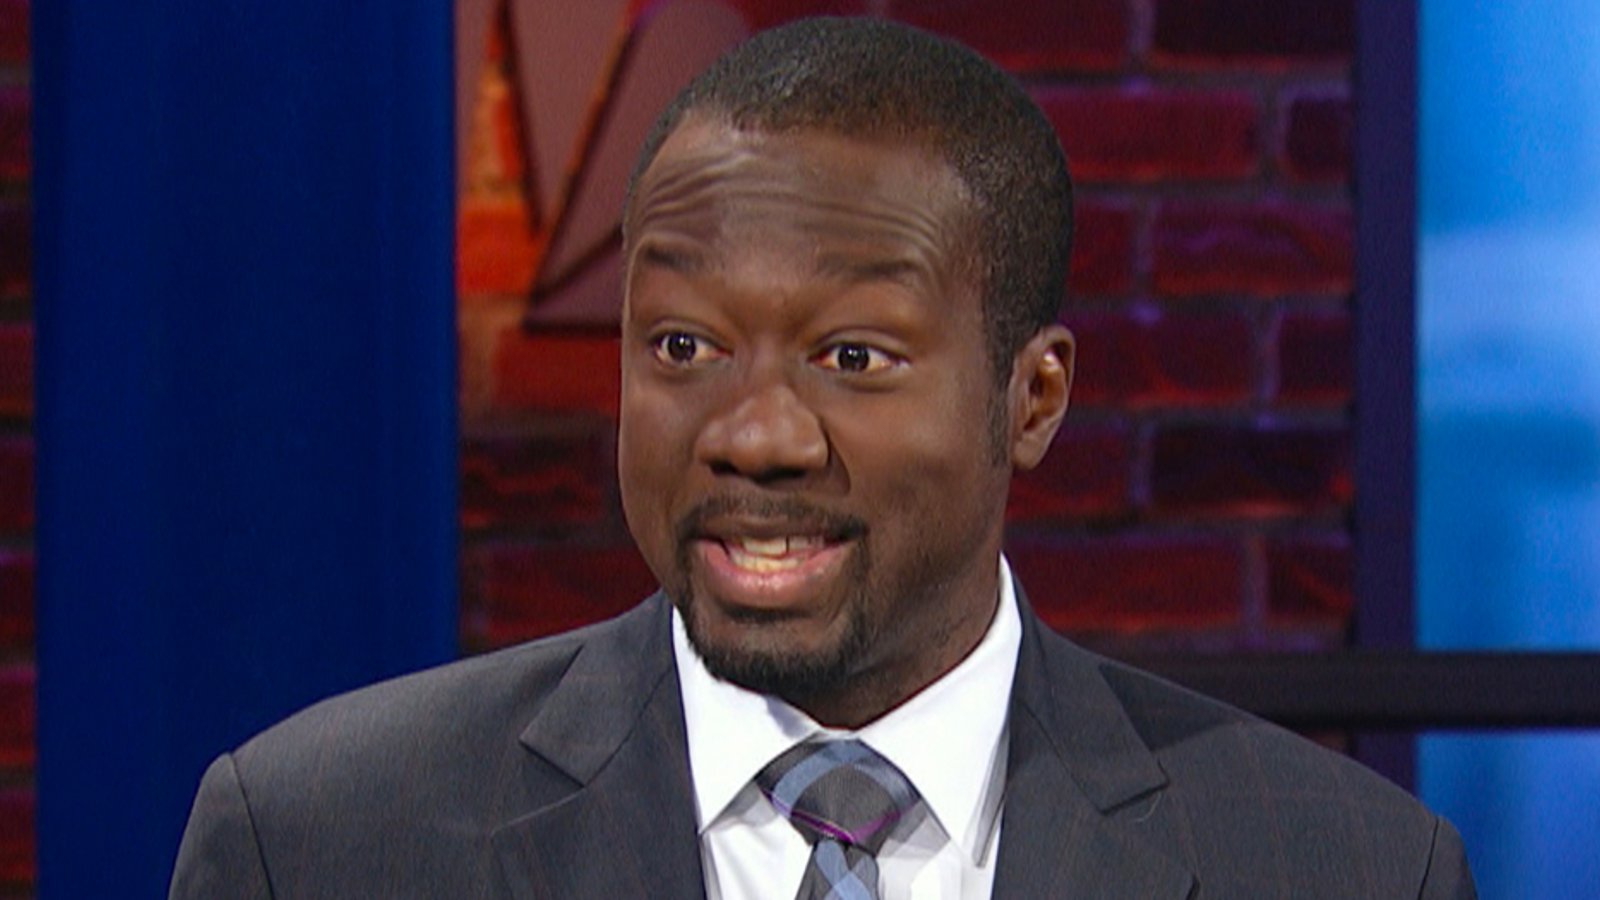 Anson Carter sums up NBA protests perfectly, says what he'd demand from his teammates